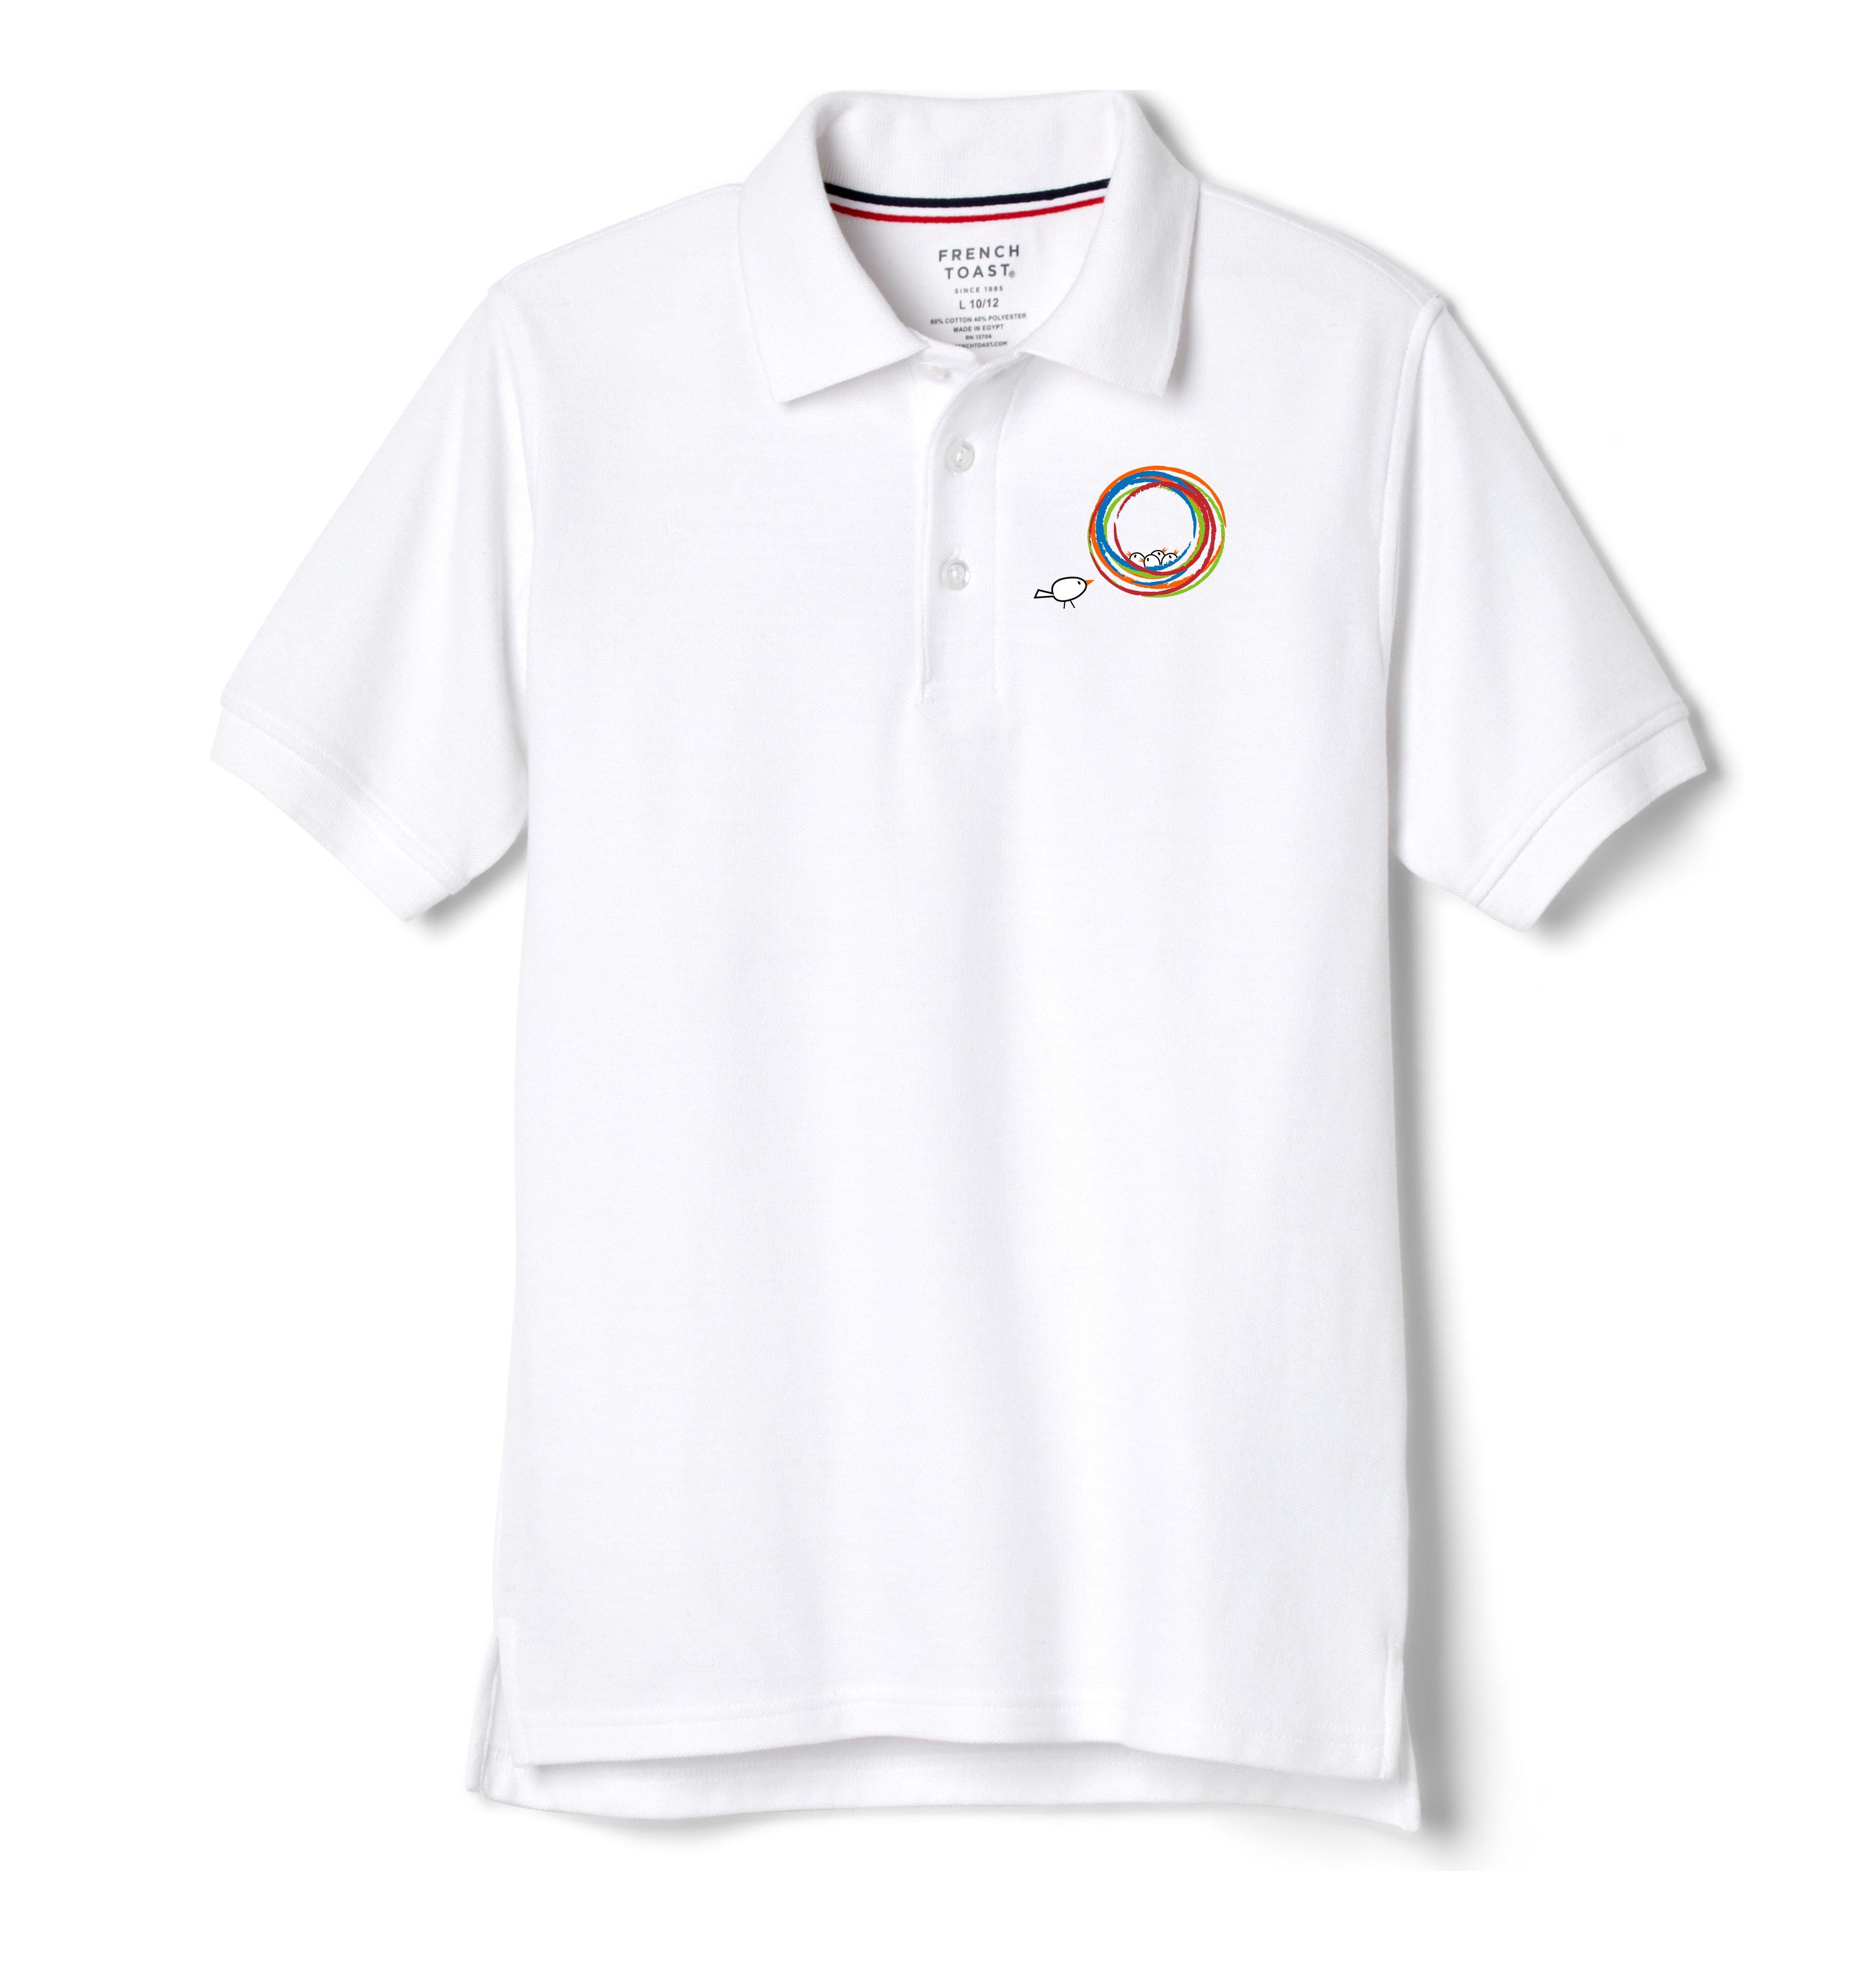 DPK Unisex YOUTH Polo - Shops by Green Gorilla